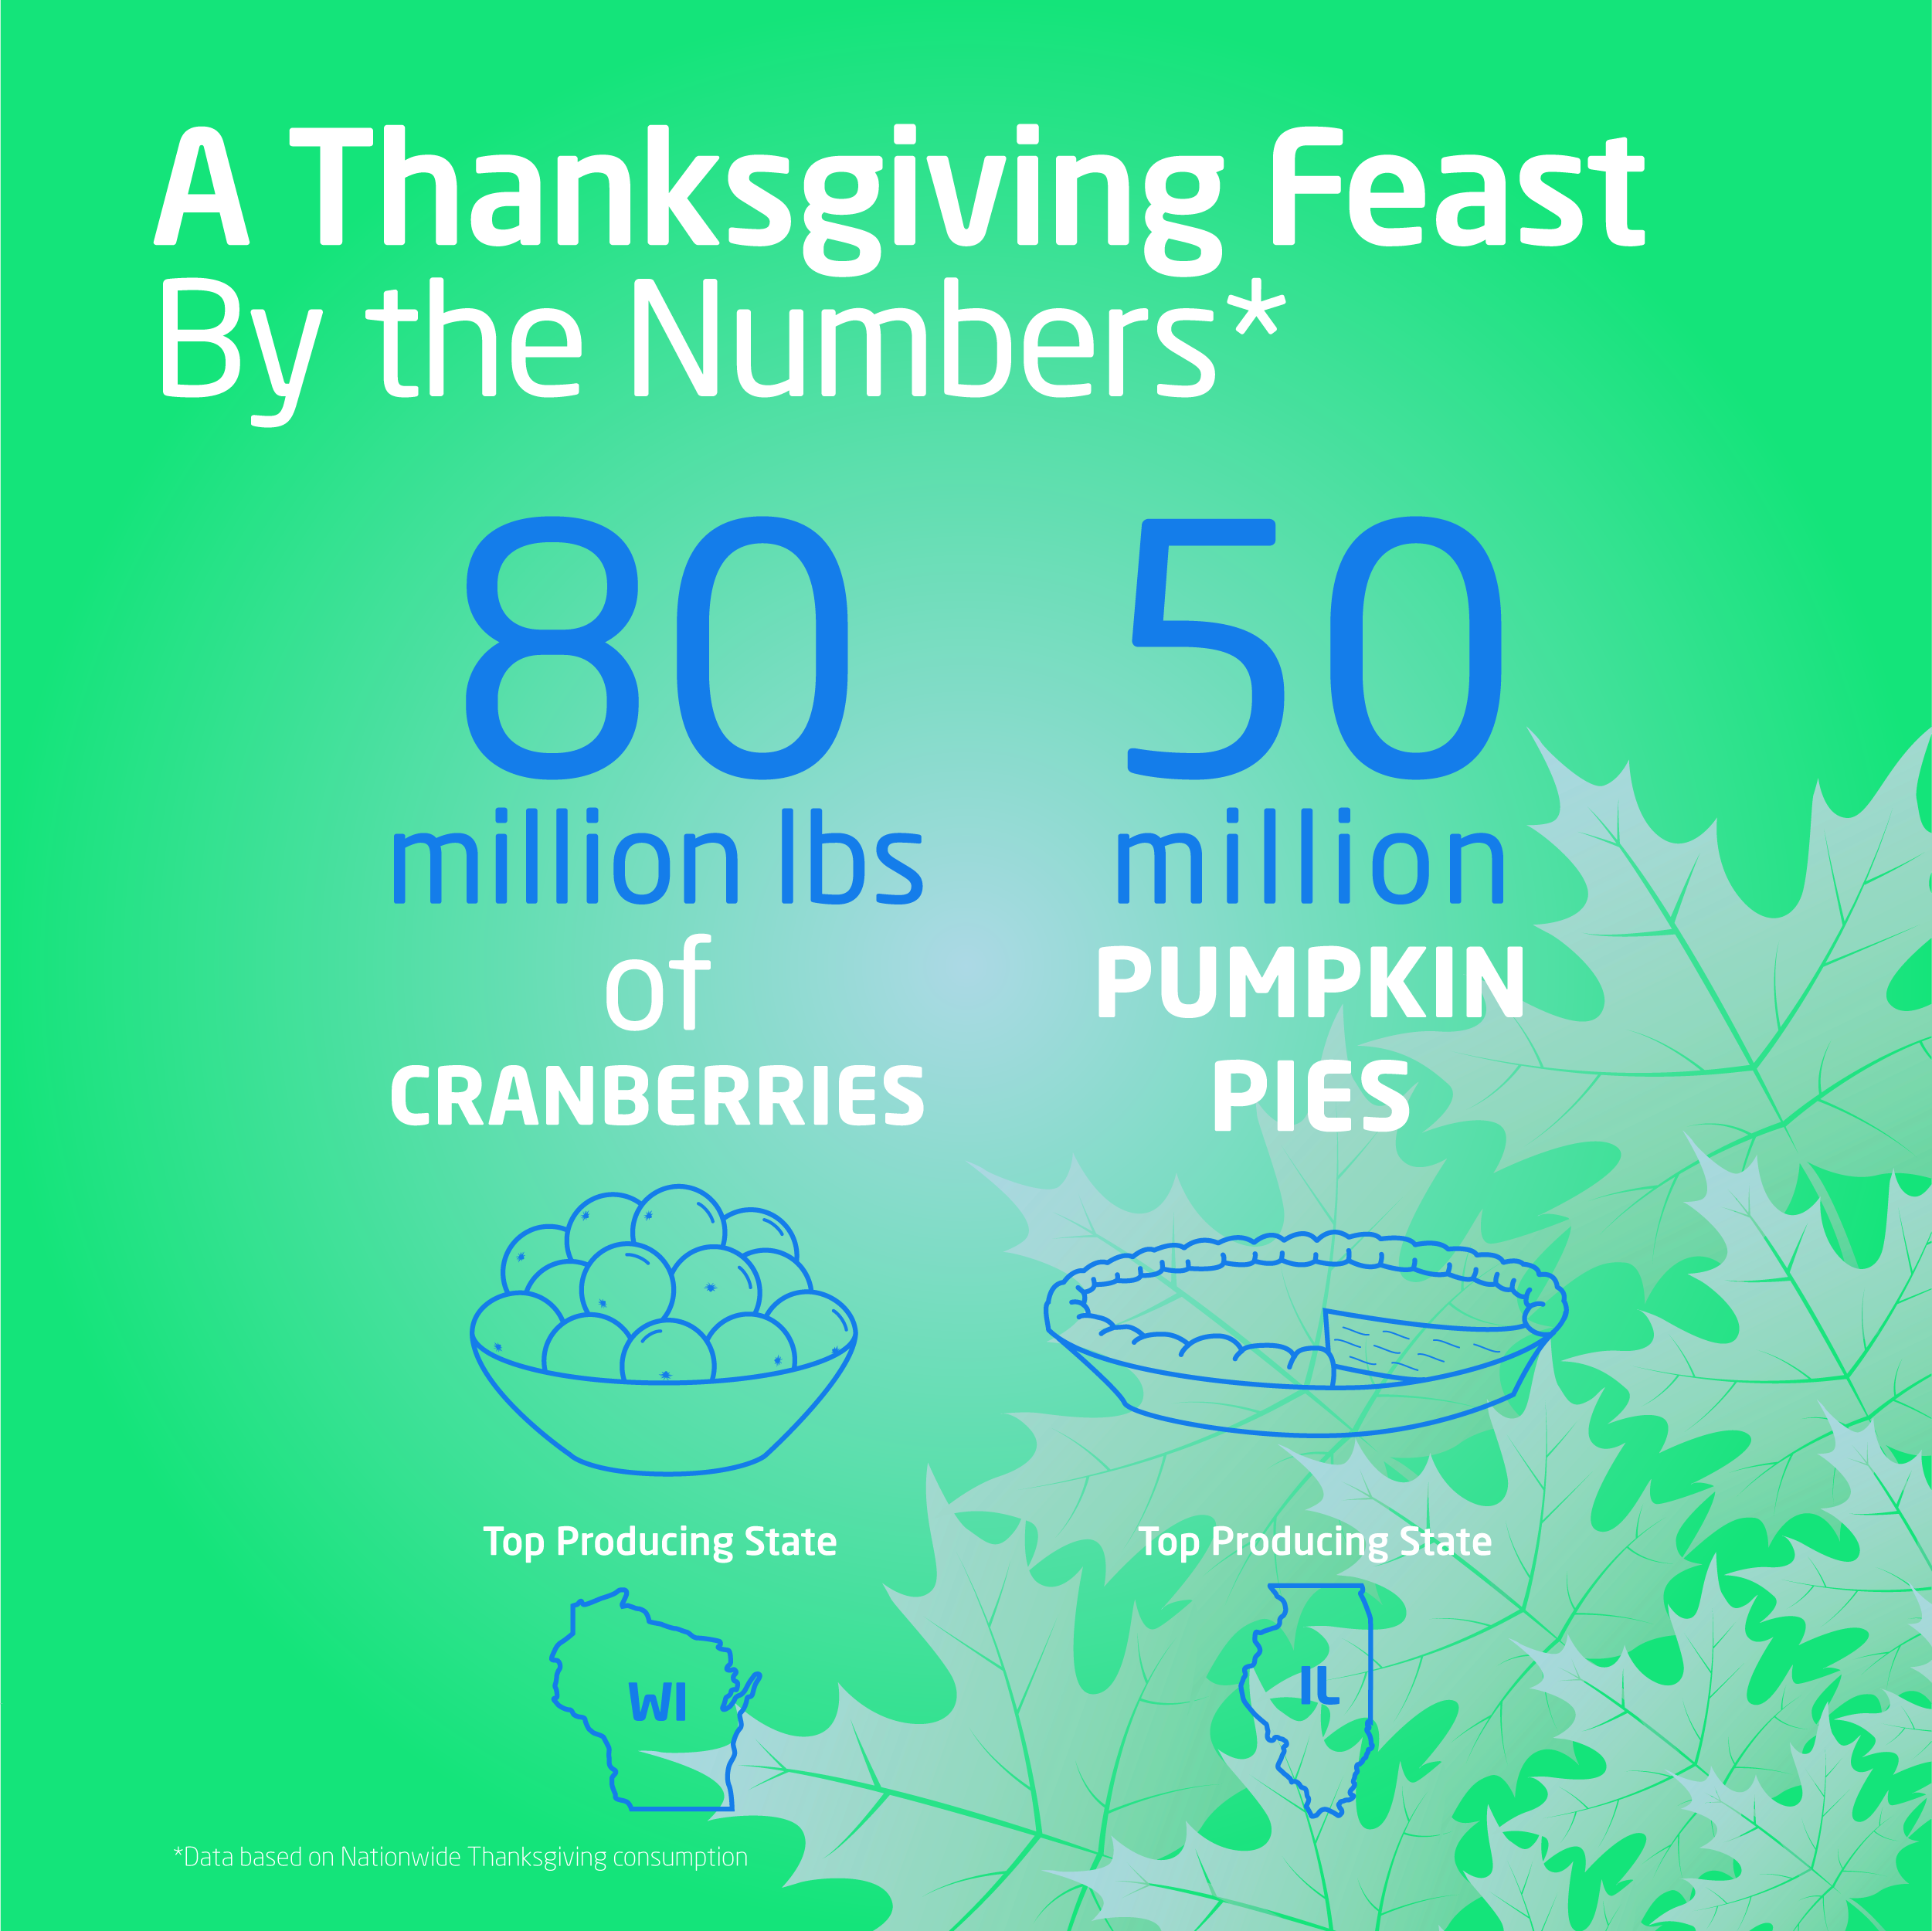 Thanksgiving Pumpkin Pies and Cranberries by the Numbers